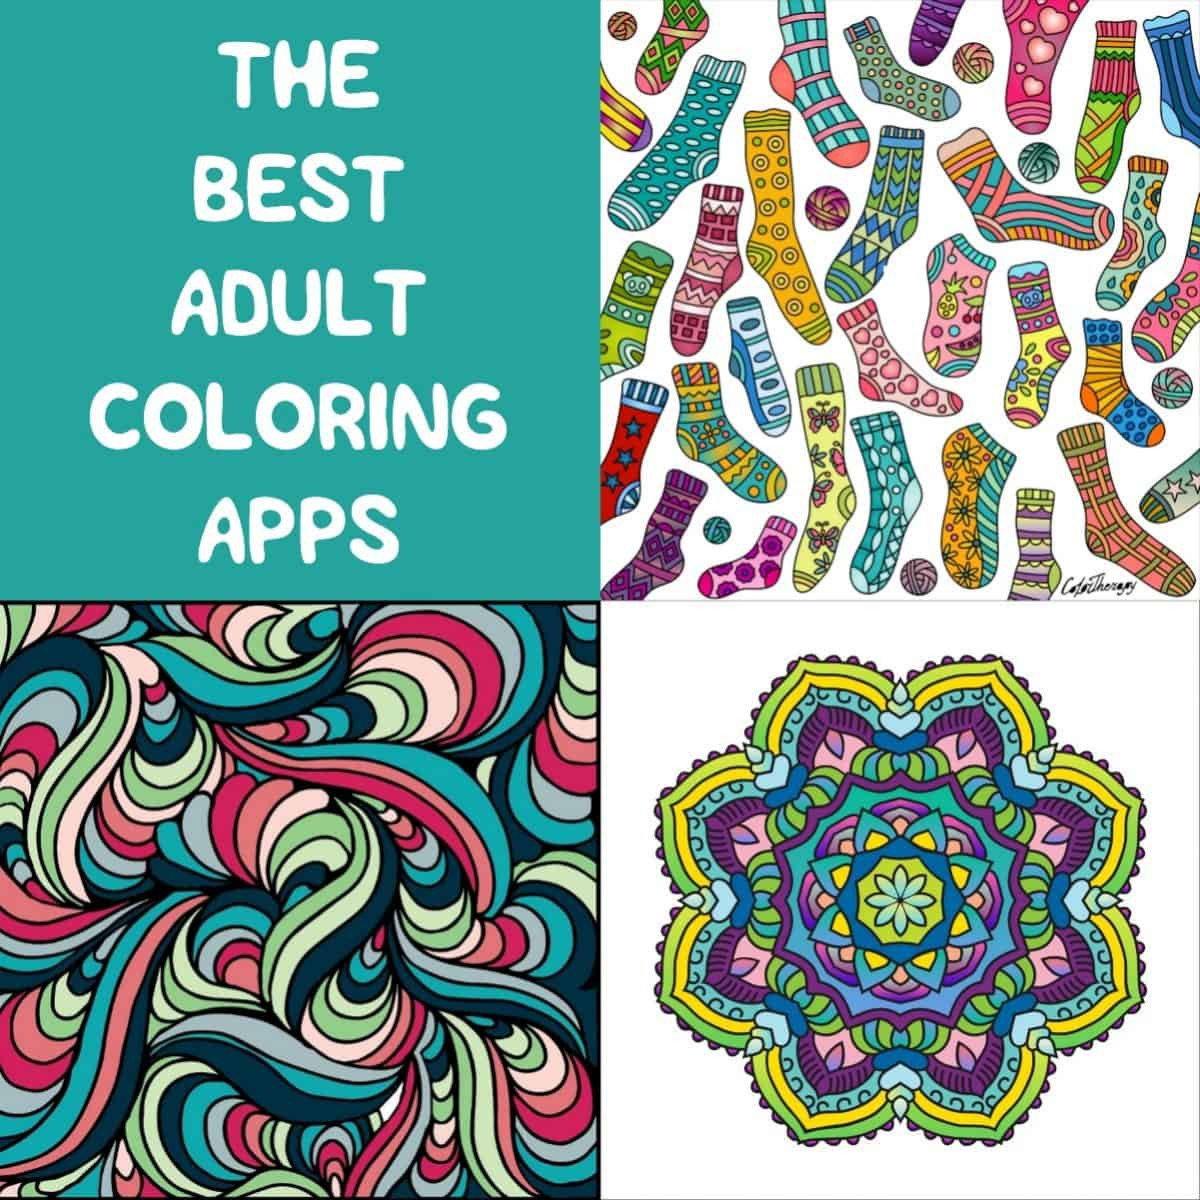 Coloring Books For Adults App
 The Best Adult Coloring Apps diycandy